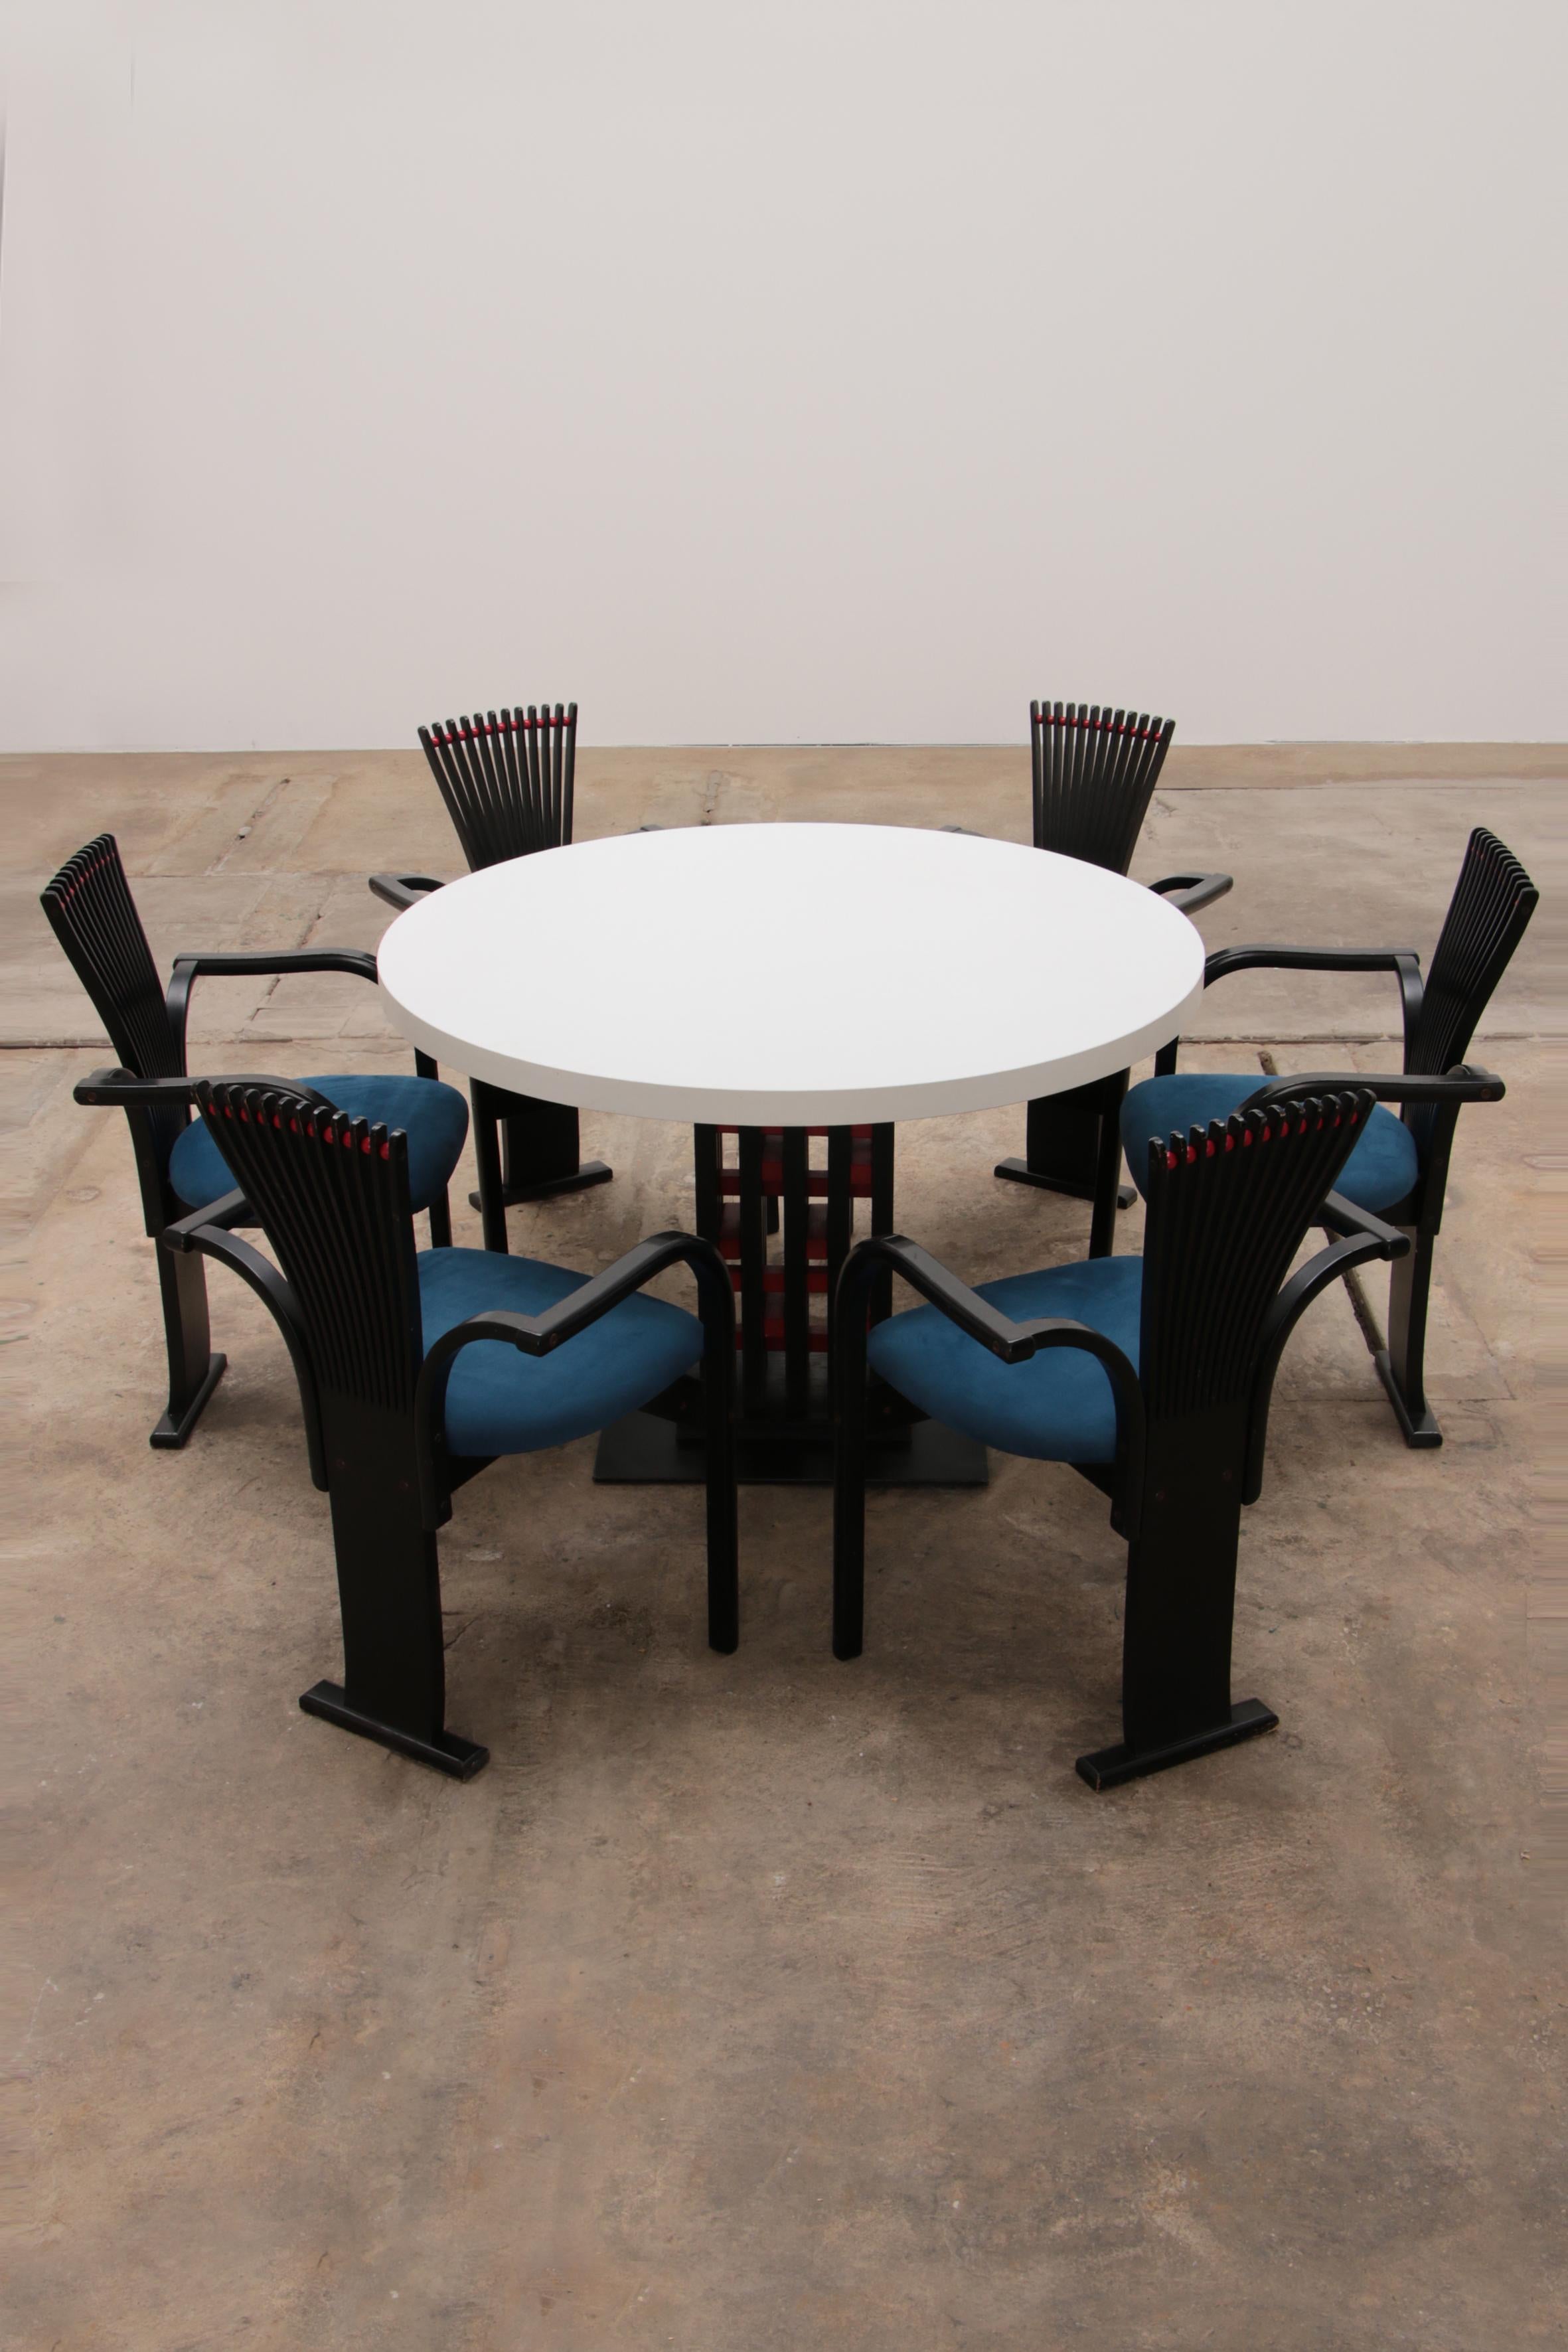 1980s dining table and chairs